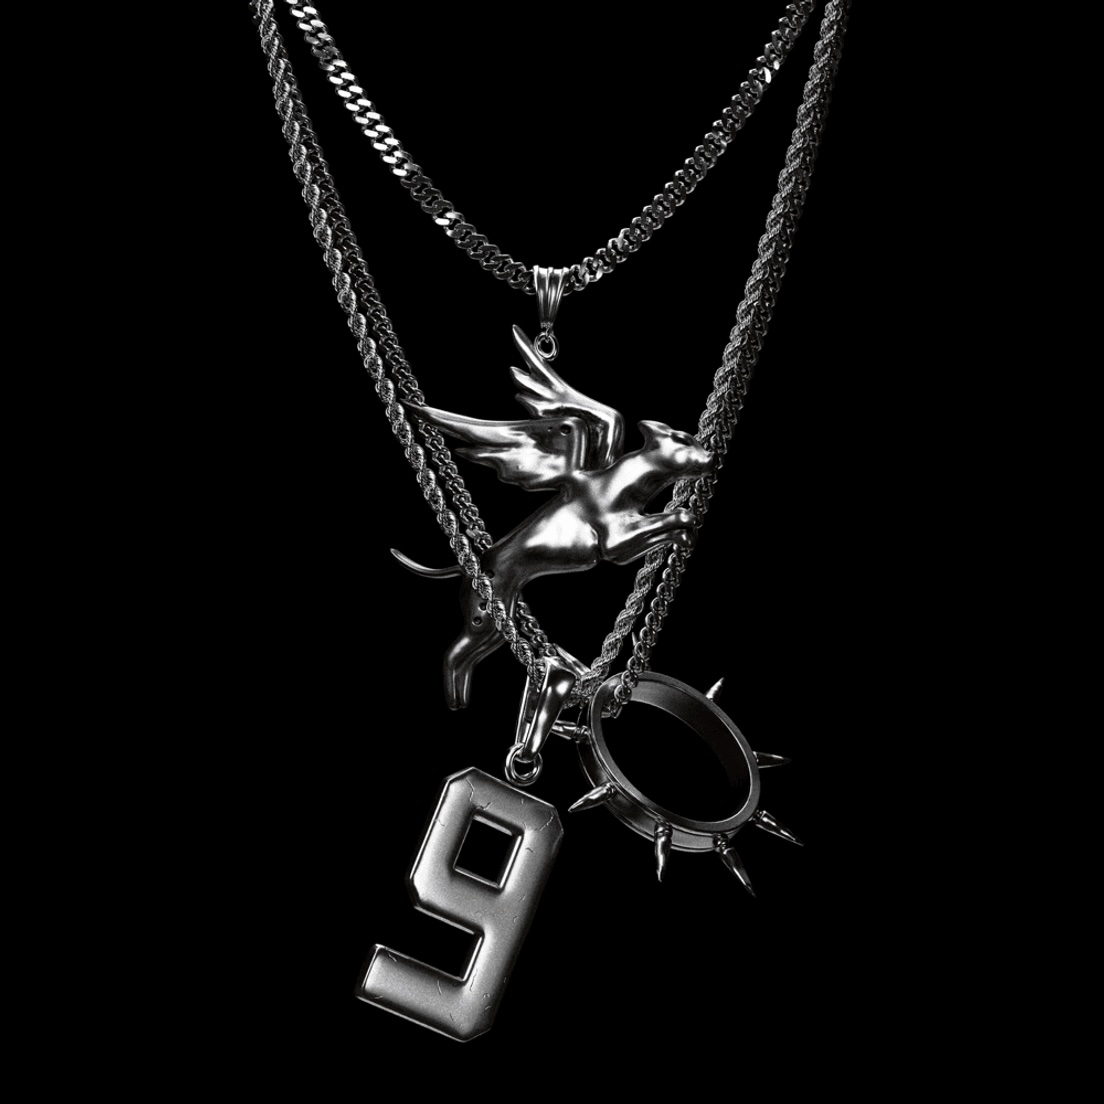 A collection of silver chains on a black background, featuring a winged horse, the number 9, and a ring with spikes